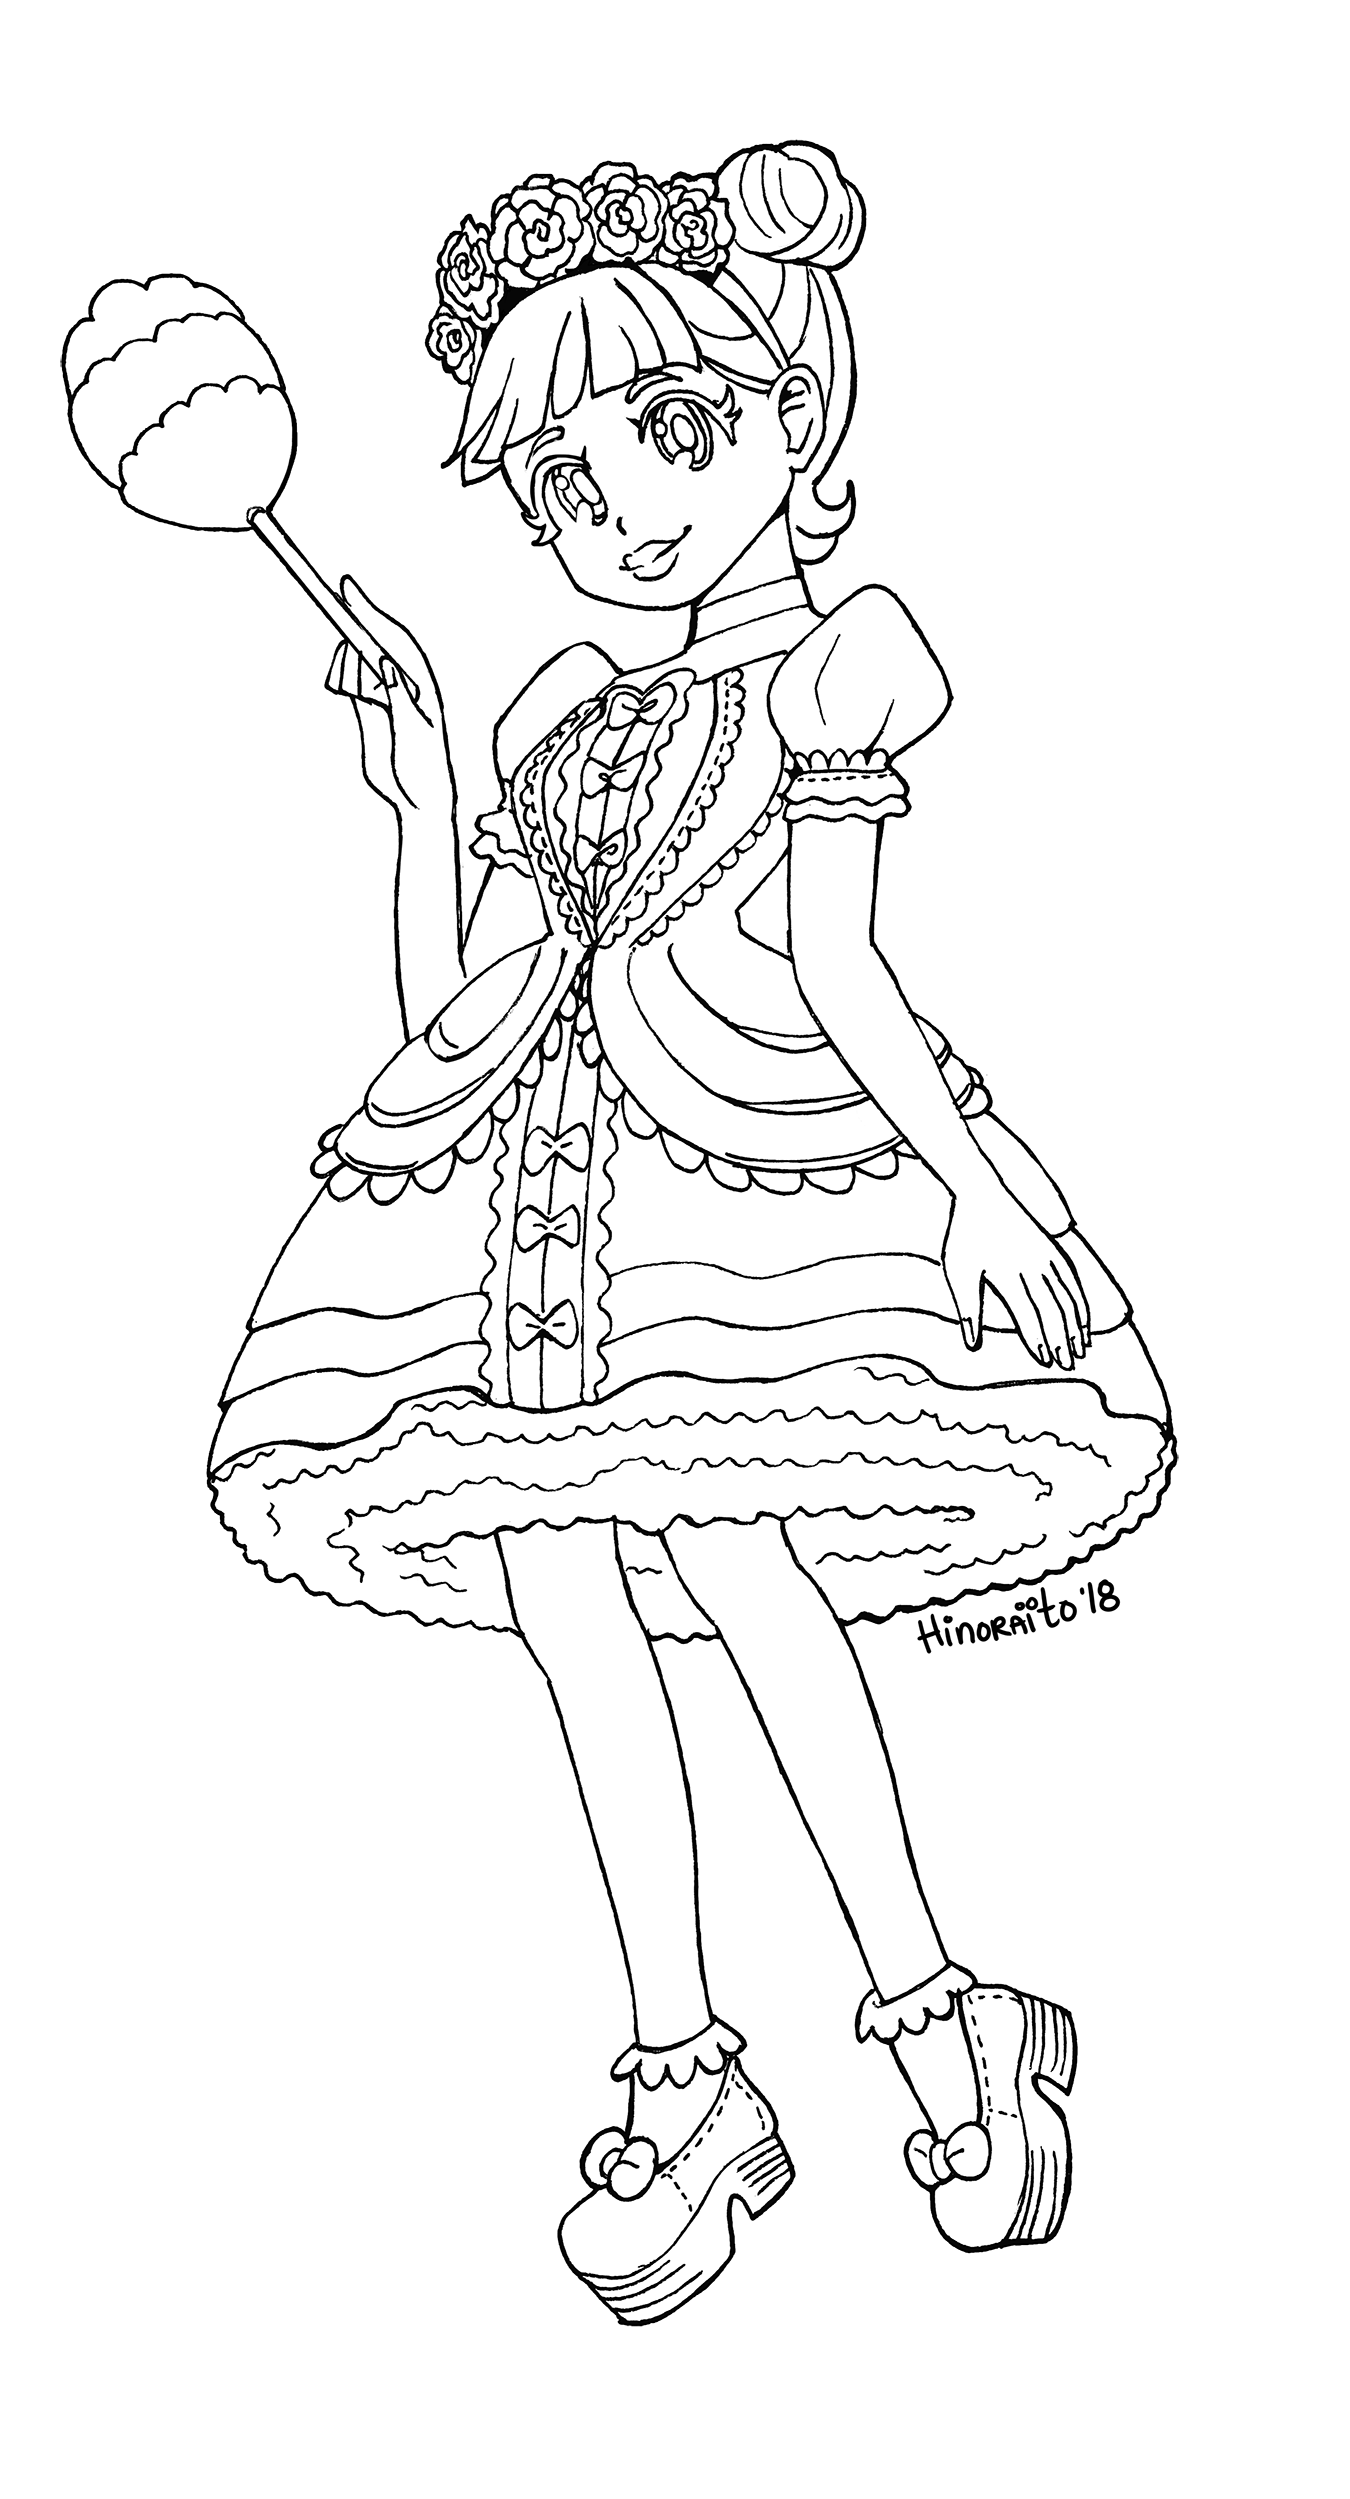 Download Midnight - LOL Surprise Doll - Coloring Page by hinoraito on DeviantArt